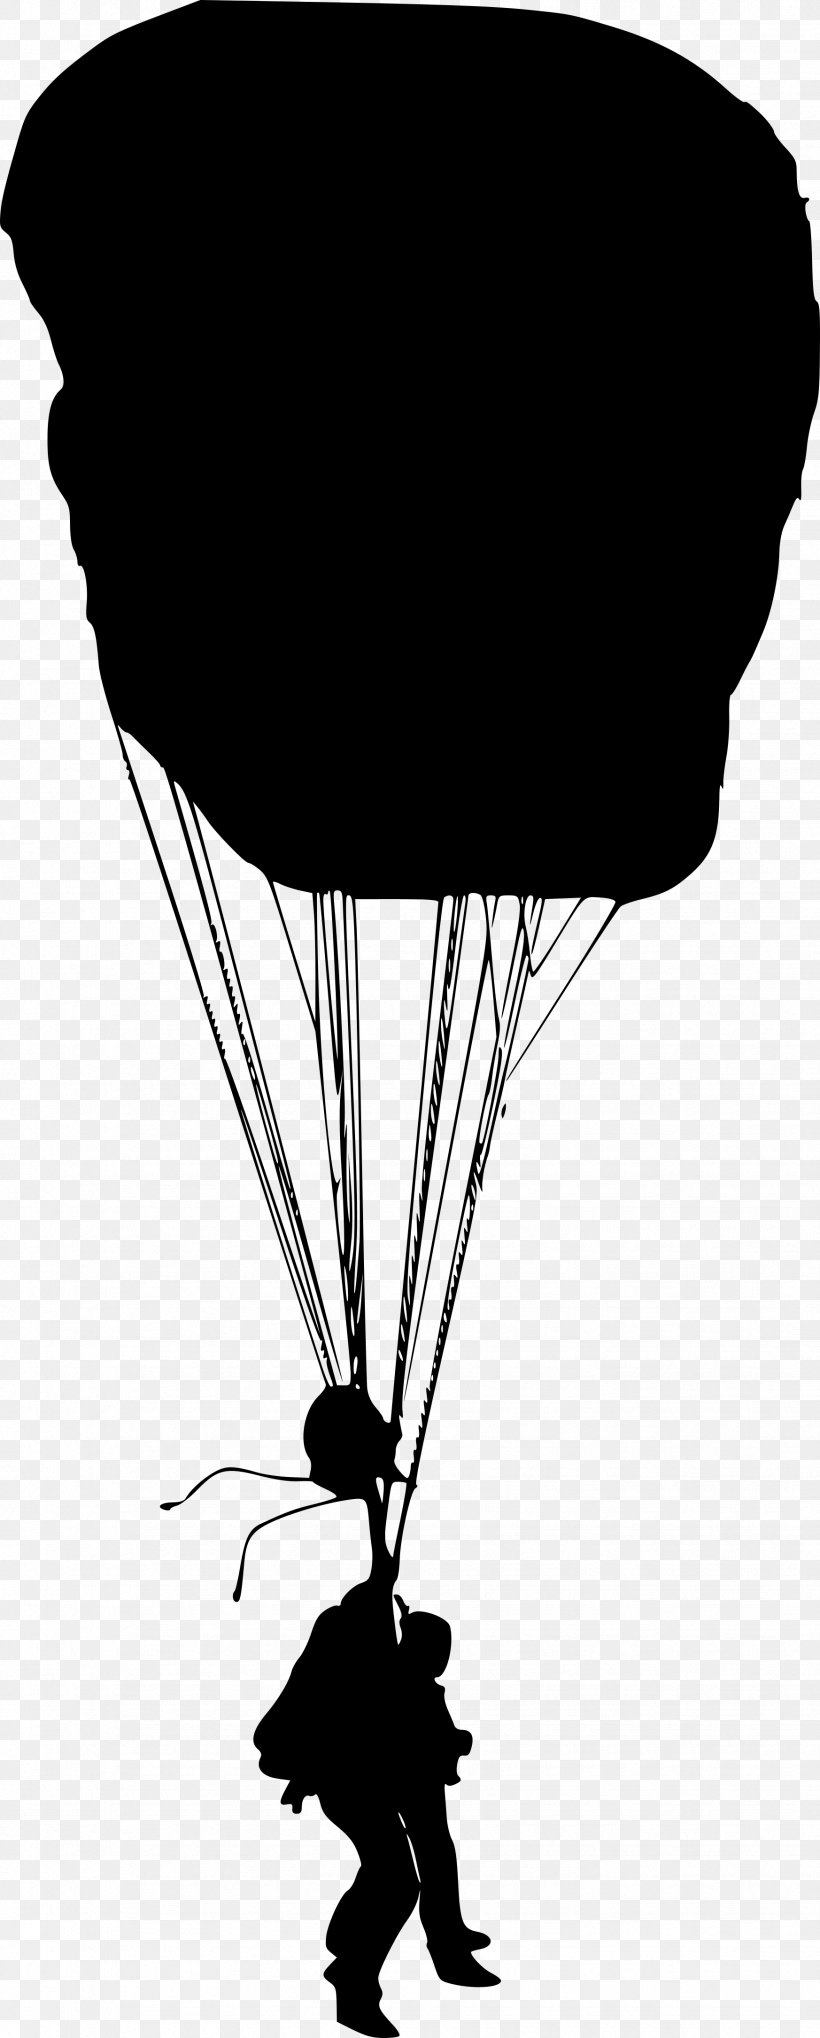 Leather / Red/Blue Silhouette Paratrooper Photography Black & White, PNG, 1746x4341px, Leather Redblue, Black White M, Blackandwhite, Green, Hot Air Balloon Download Free